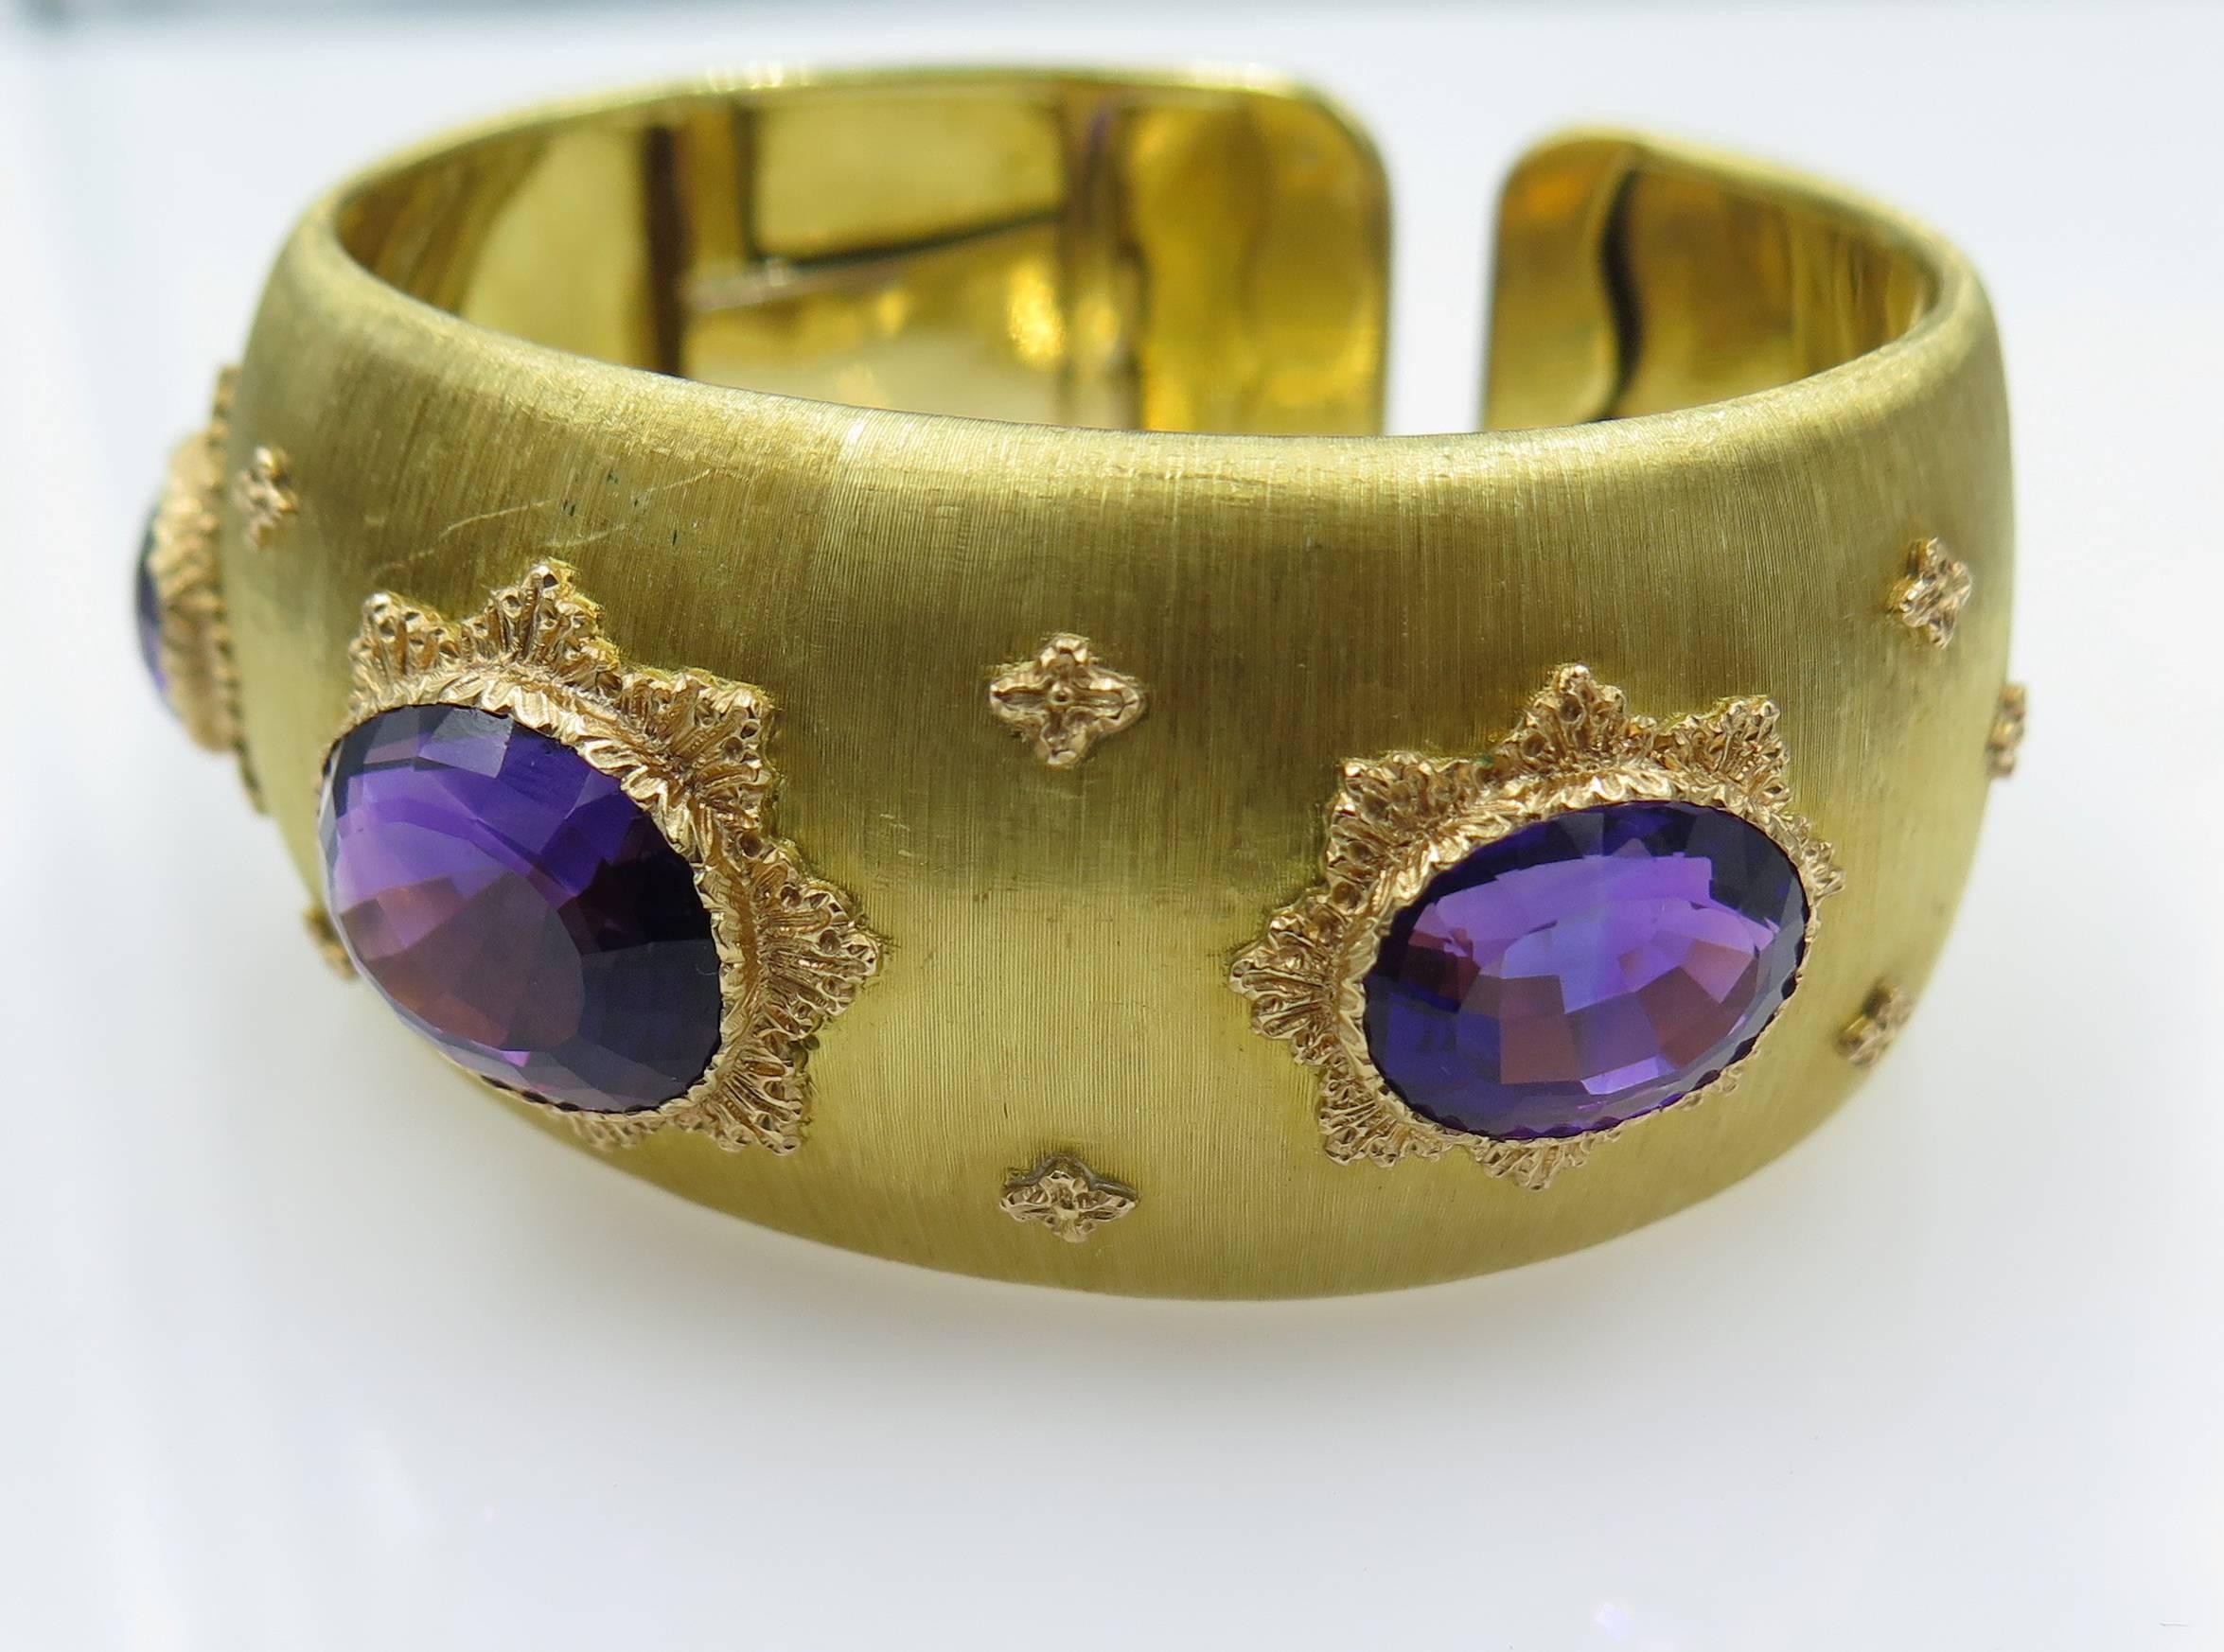 An 18 karat gold and amethyst bracelet, Buccellati, Italian. Designed as a textured gold hinged cuff, centering three oval-cut amethysts, measuring from approximately 13.70 x 10.00 x 7.30 to 16.00 x 12.50 x 10.00 mm and weighing approximately 5.50,